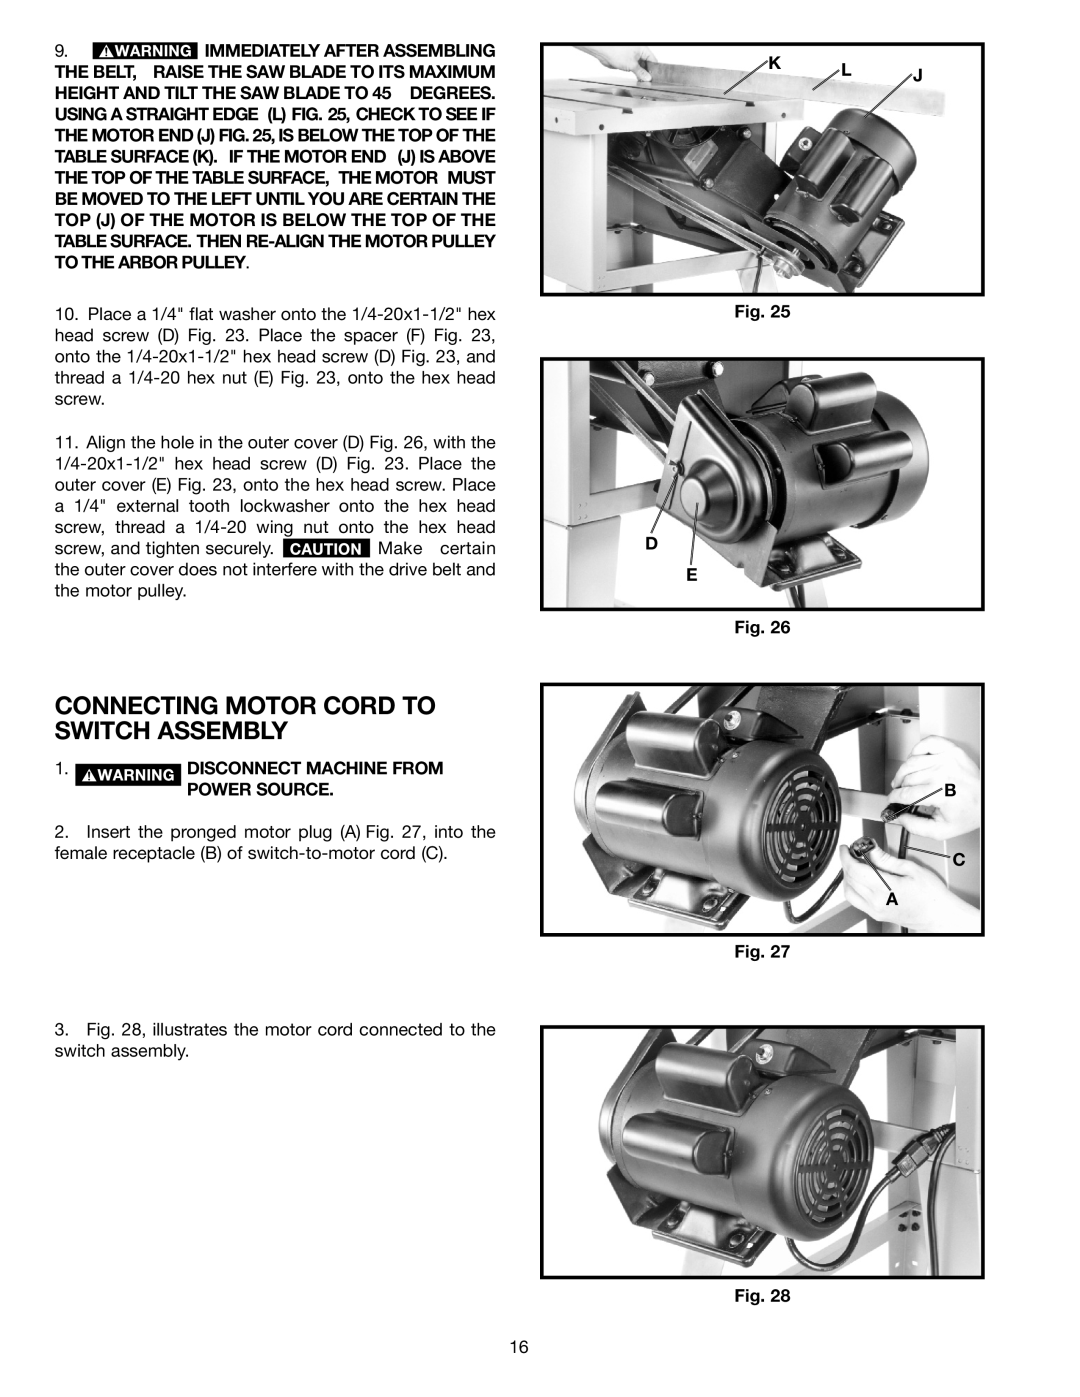 Porter-Cable 36-649, 36-678, 36-675 Connecting Motor Cord To Switch Assembly, Immediately After Assembling, K L J, B C A 